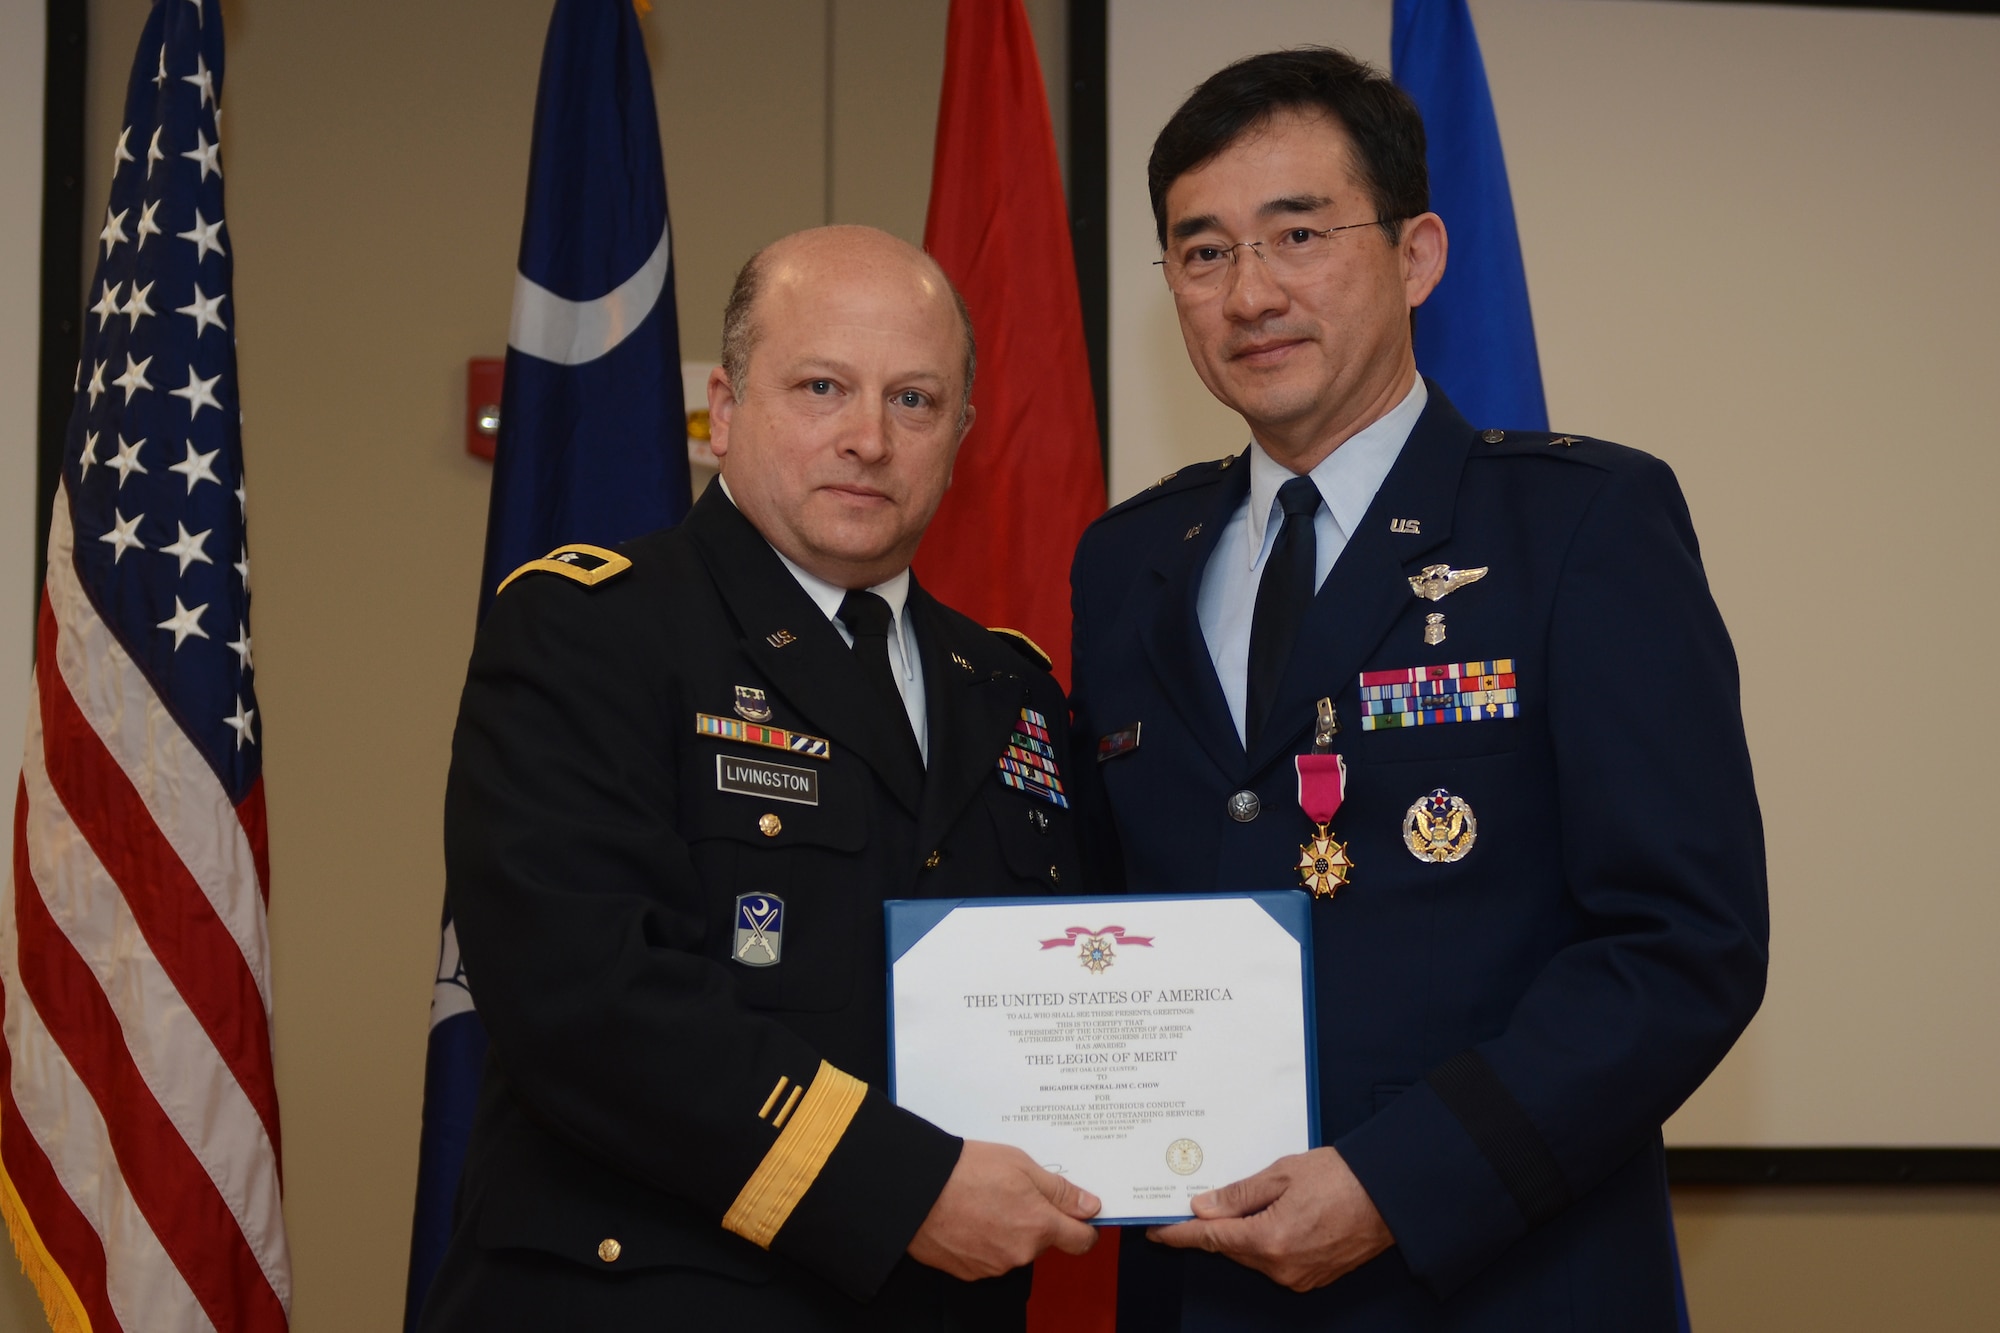 U.S. Army Maj. Gen. Robert E. Livingston Jr (left), the Adjutant General for South Carolina, presents the U.S. Air Force Legion of Merit to U.S. Air Force Brig. Gen. (Dr.) Jim Chow, the State Air Surgeon and Assistant to the Director of the Air National Guard, at McEntire Joint National Guard Base, Feb. 8, 2015. Brig. Gen. Chow retired with thirty years of service to the South Carolina Air National Guard and the 169th Fighter Wing. (U.S. Air National Guard photo by Senior Master Sgt. Edward Snyder/Released)